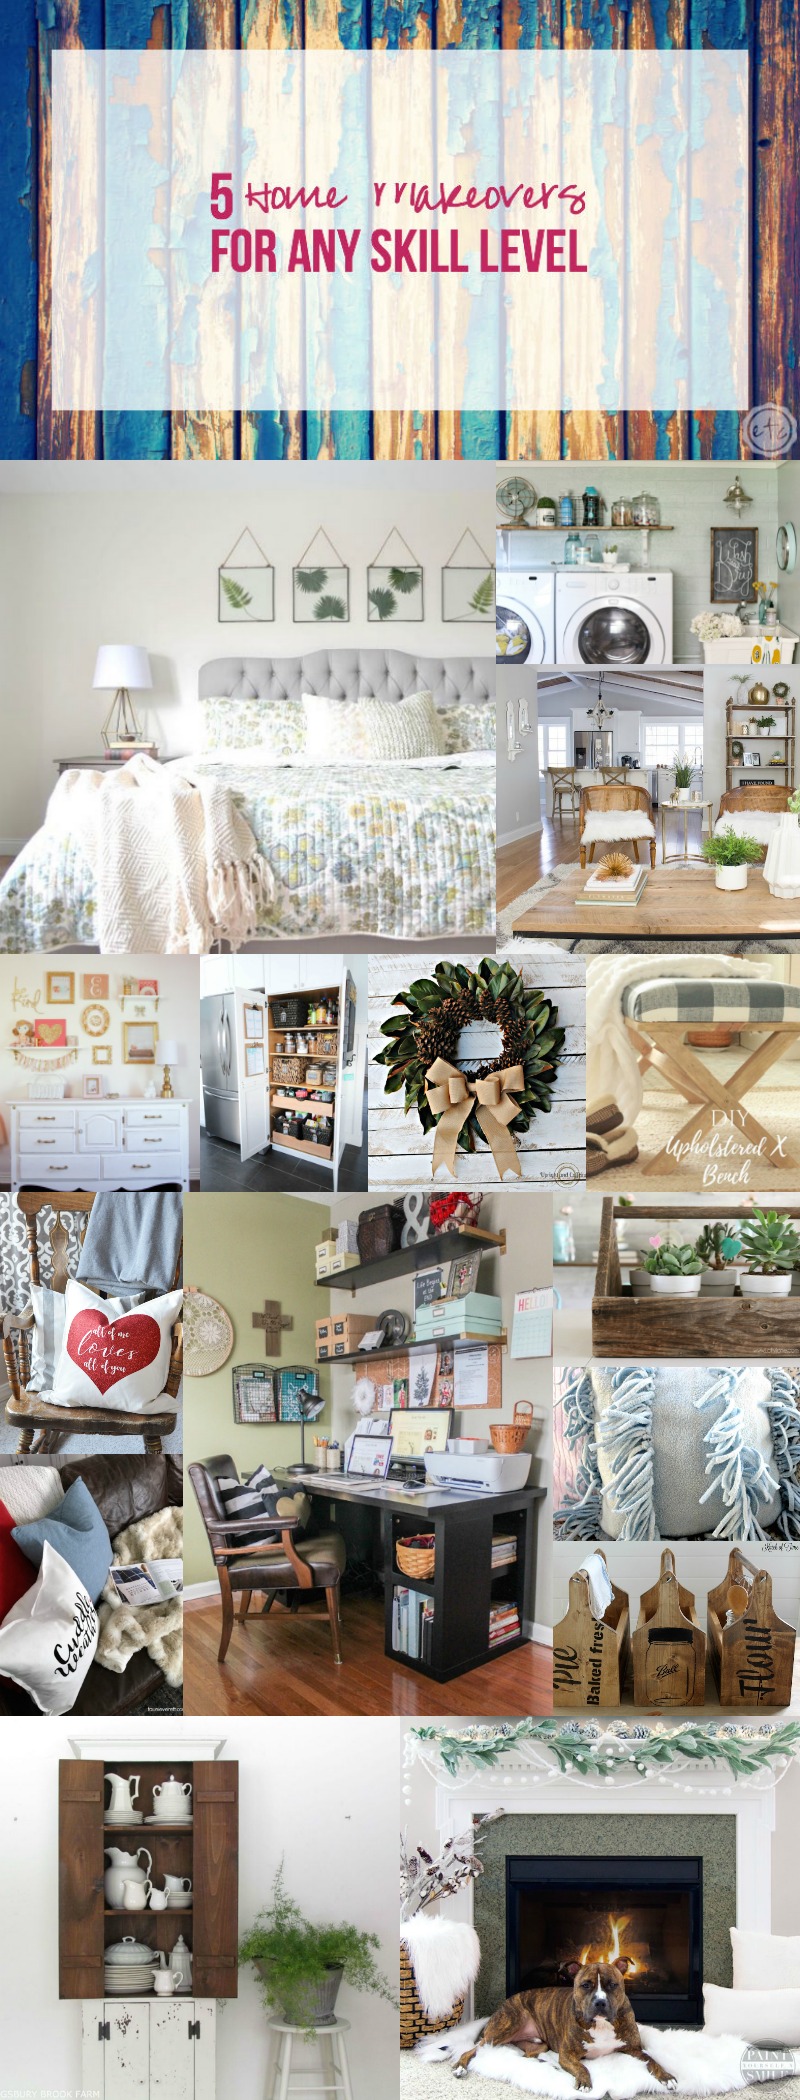 15 Home Makeovers for Any Skill Level